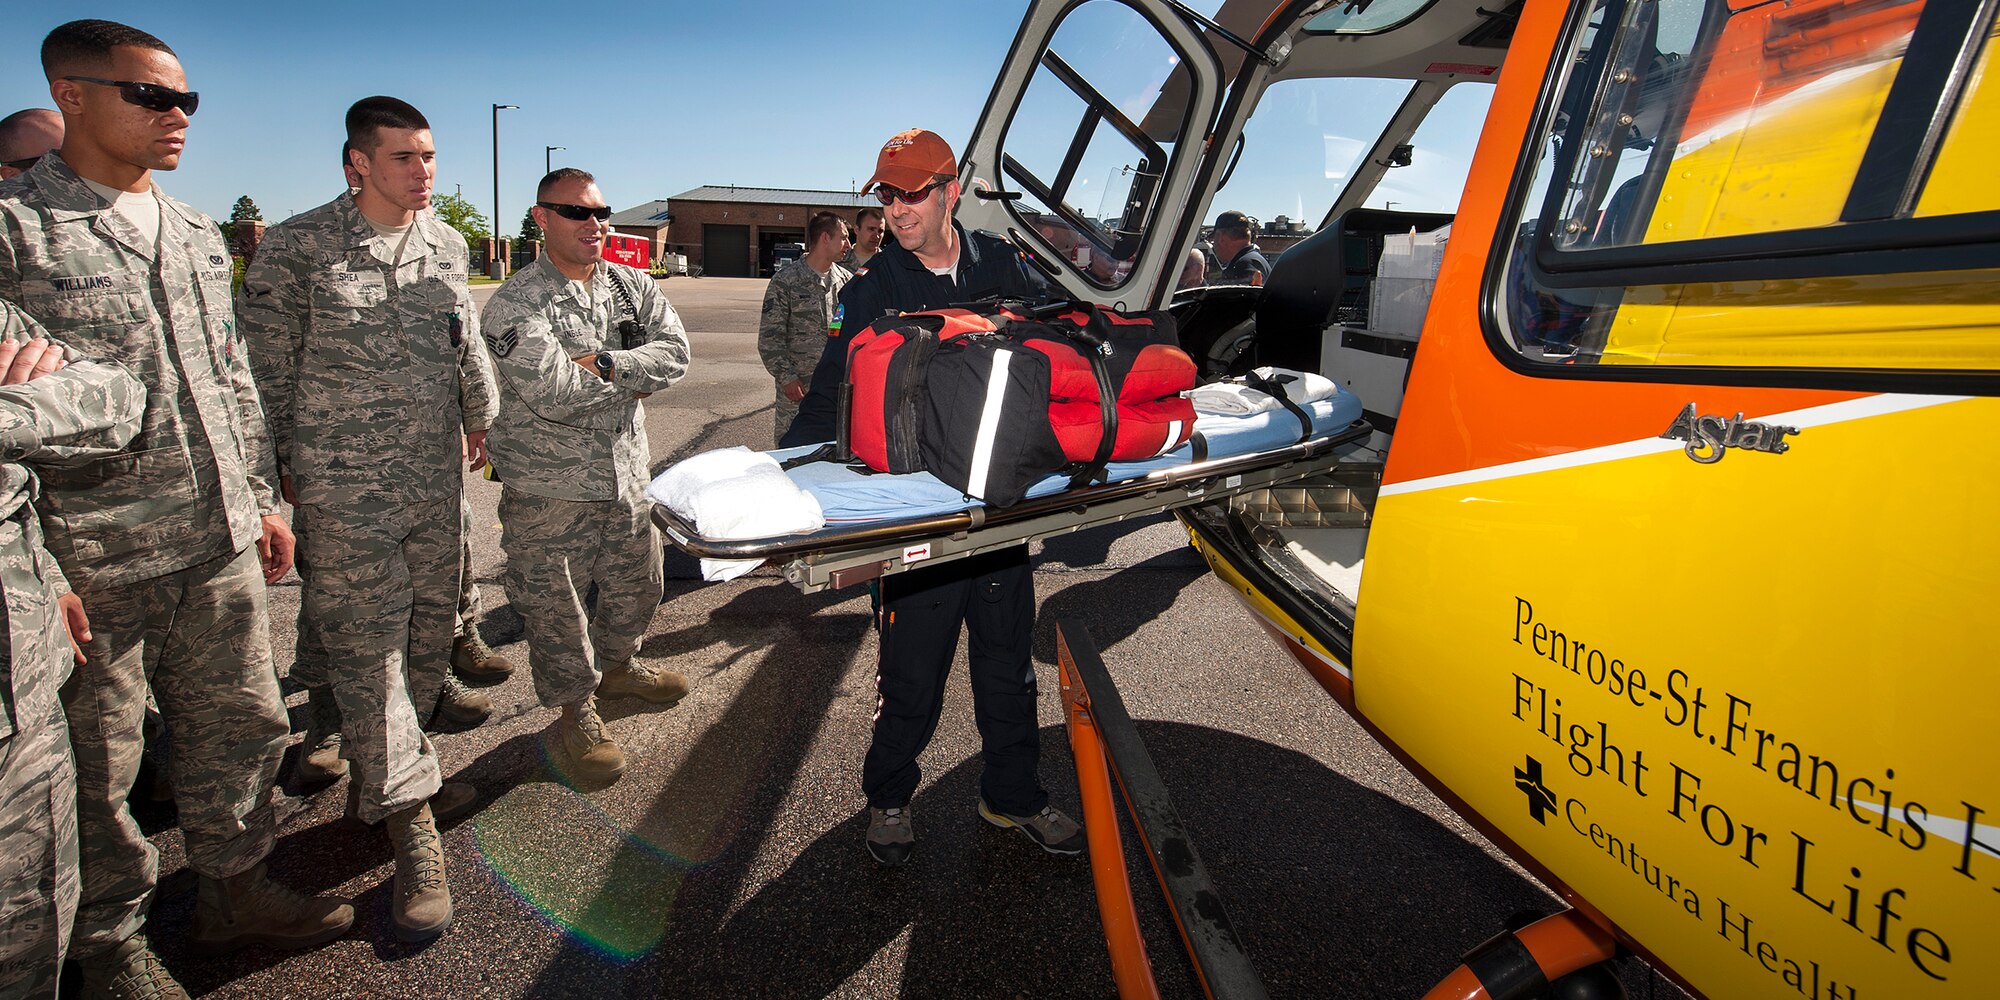 PETERSON AIR FORCE BASE, Colo. -- Rod Gano, Flight for Life Colorado paramedic, shows fire prevention technicians from the 21st Civil Engineer Squadron how to slide out a stretcher from the Flight for Life helicopter here June 13. Flight for Life Colorado held a training session with the local fire prevention team to gain familiarization with their operations in the event a patient needs rapid transport. (U.S. Air Force photo/Craig Denton)